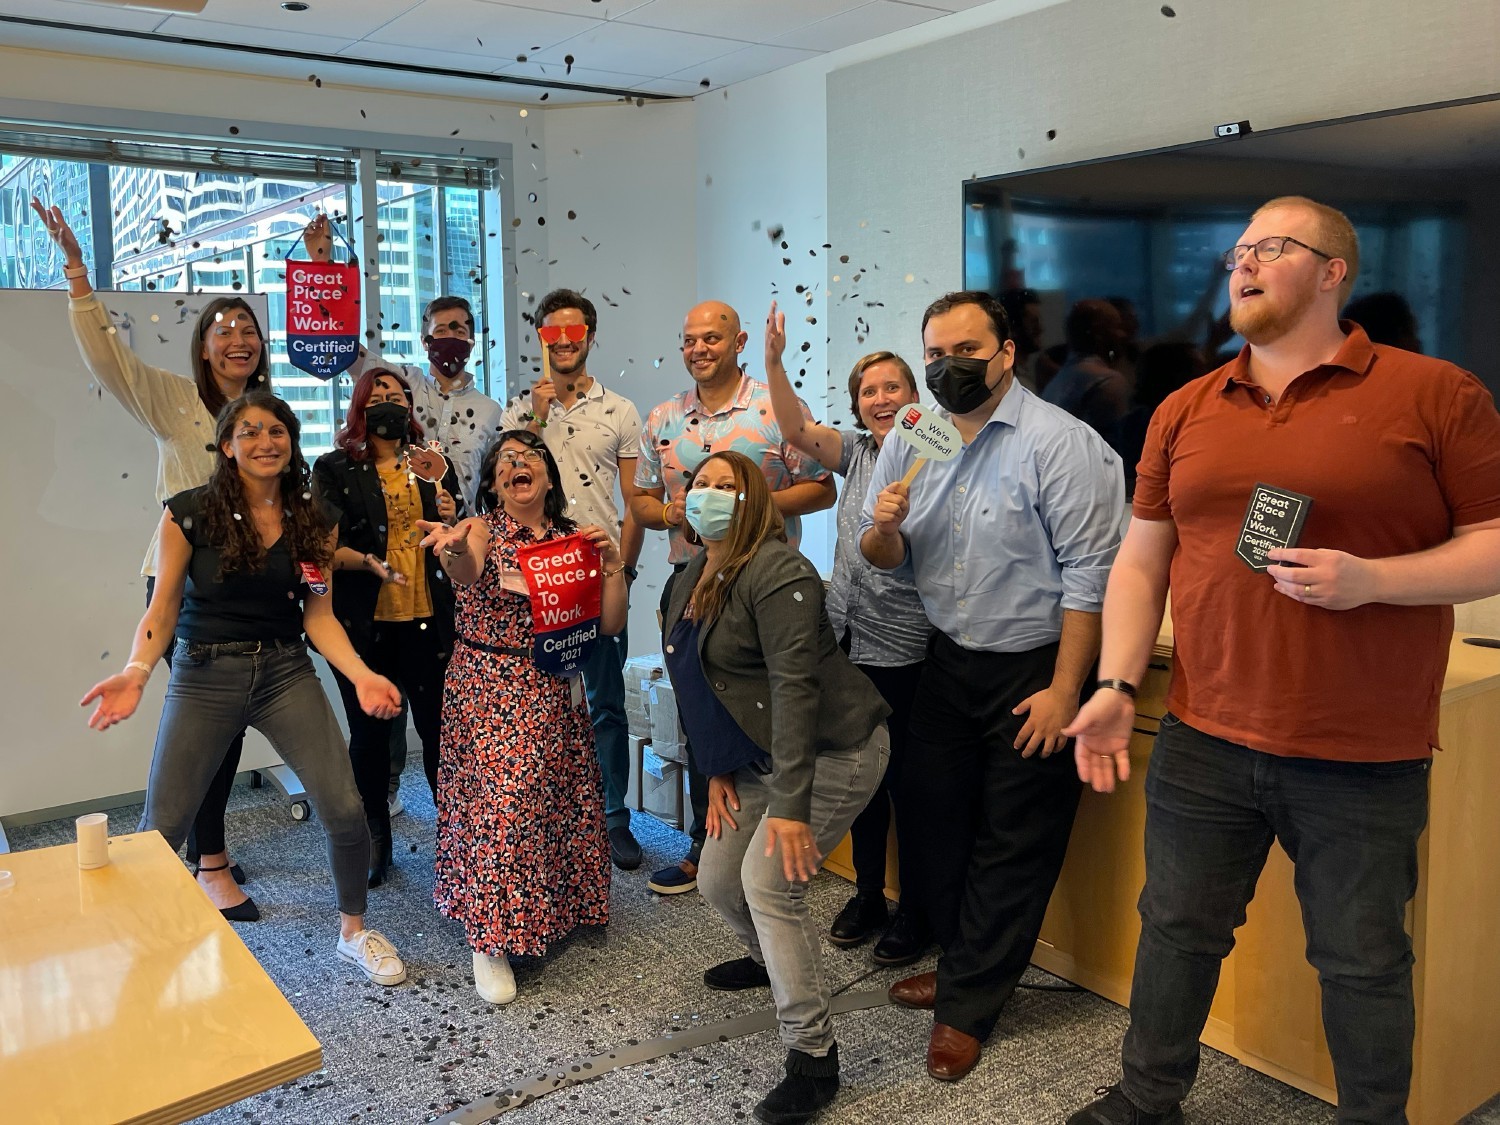 With a bit of confetti in the conference room, Credico's team celebrates its 2021 Great Place To Work® Certification™